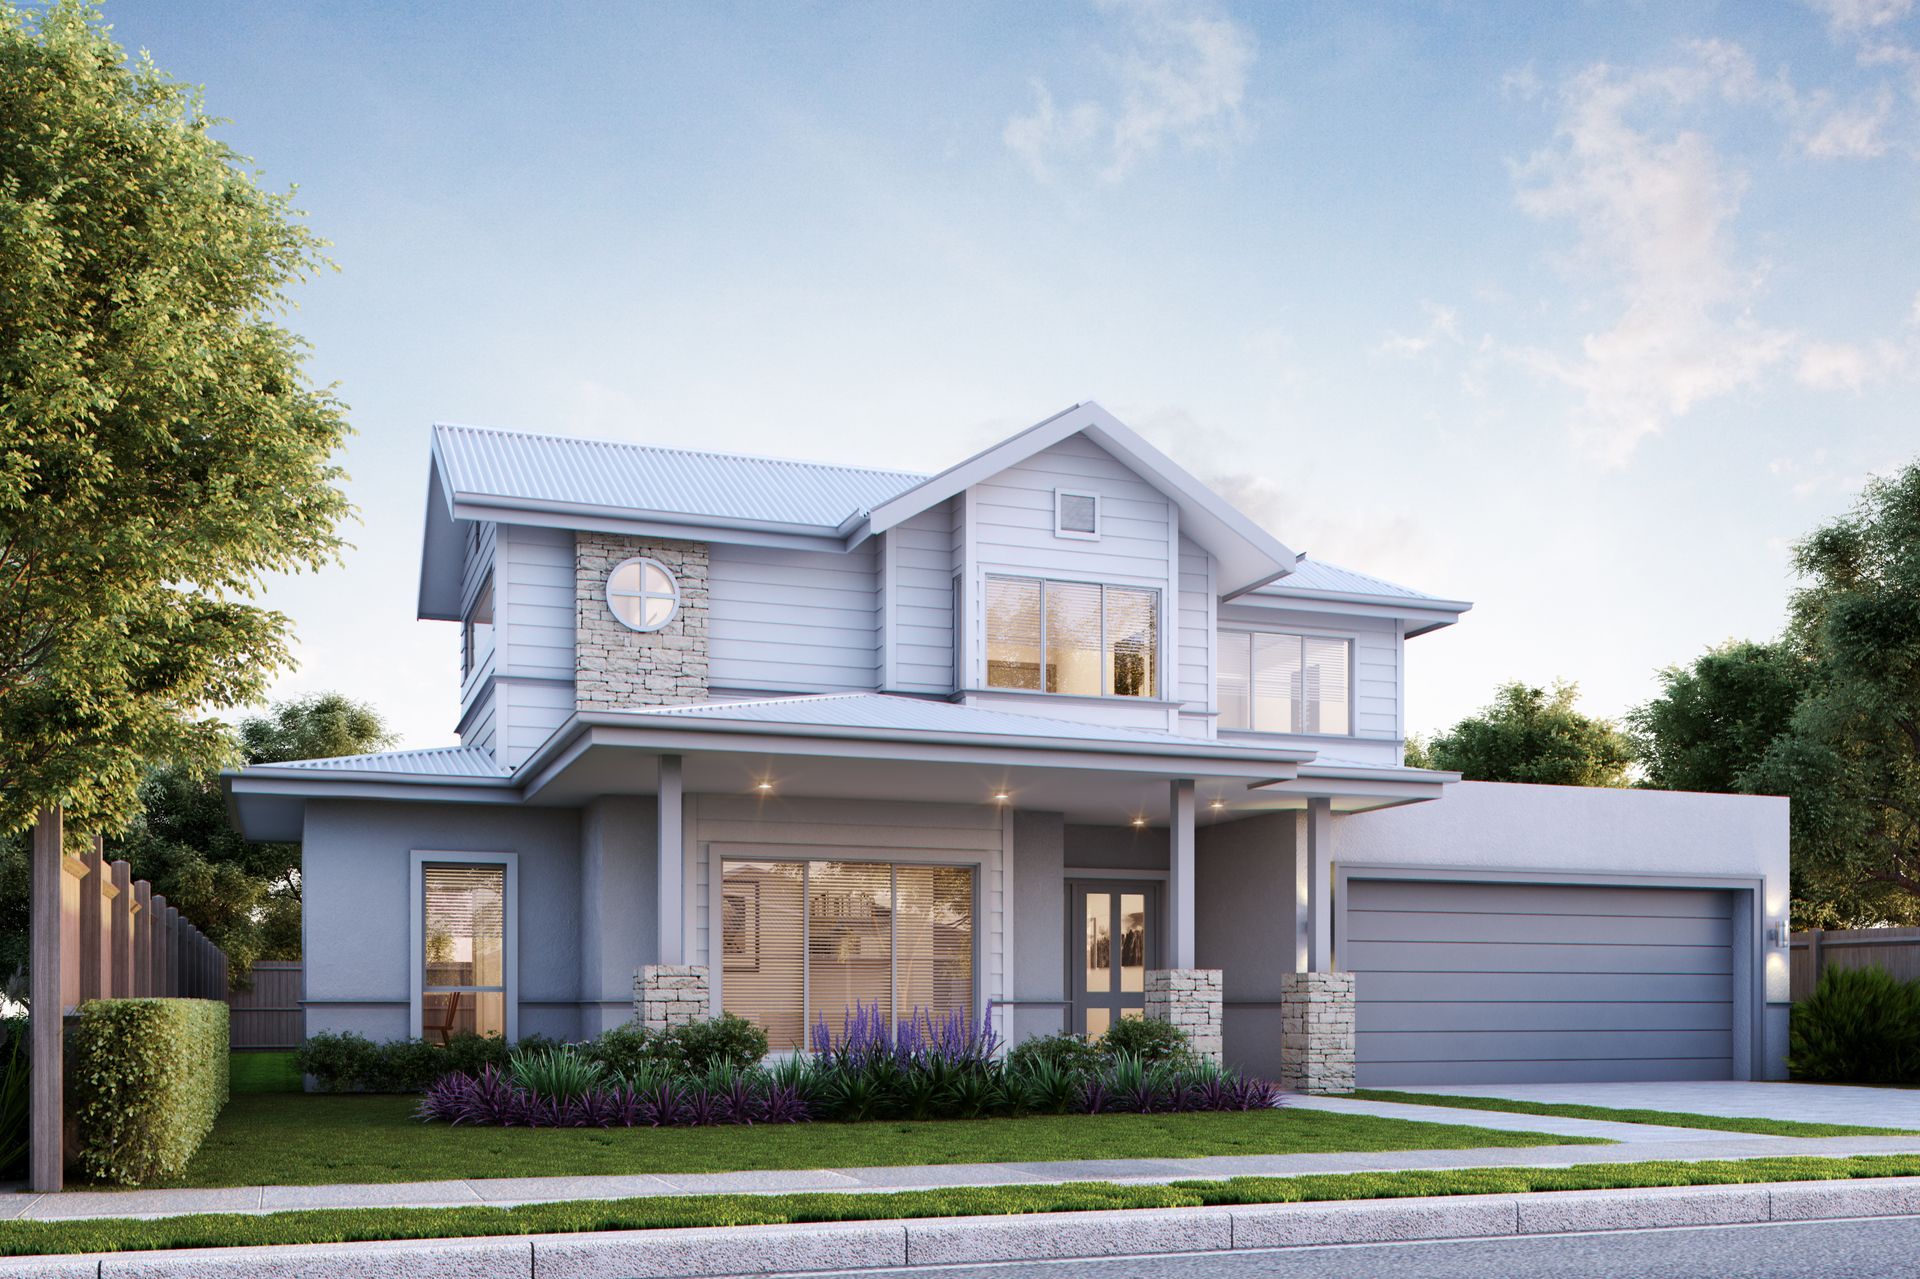 Acreage Homes Concept Art — Home Builders in Tamworth, NSW